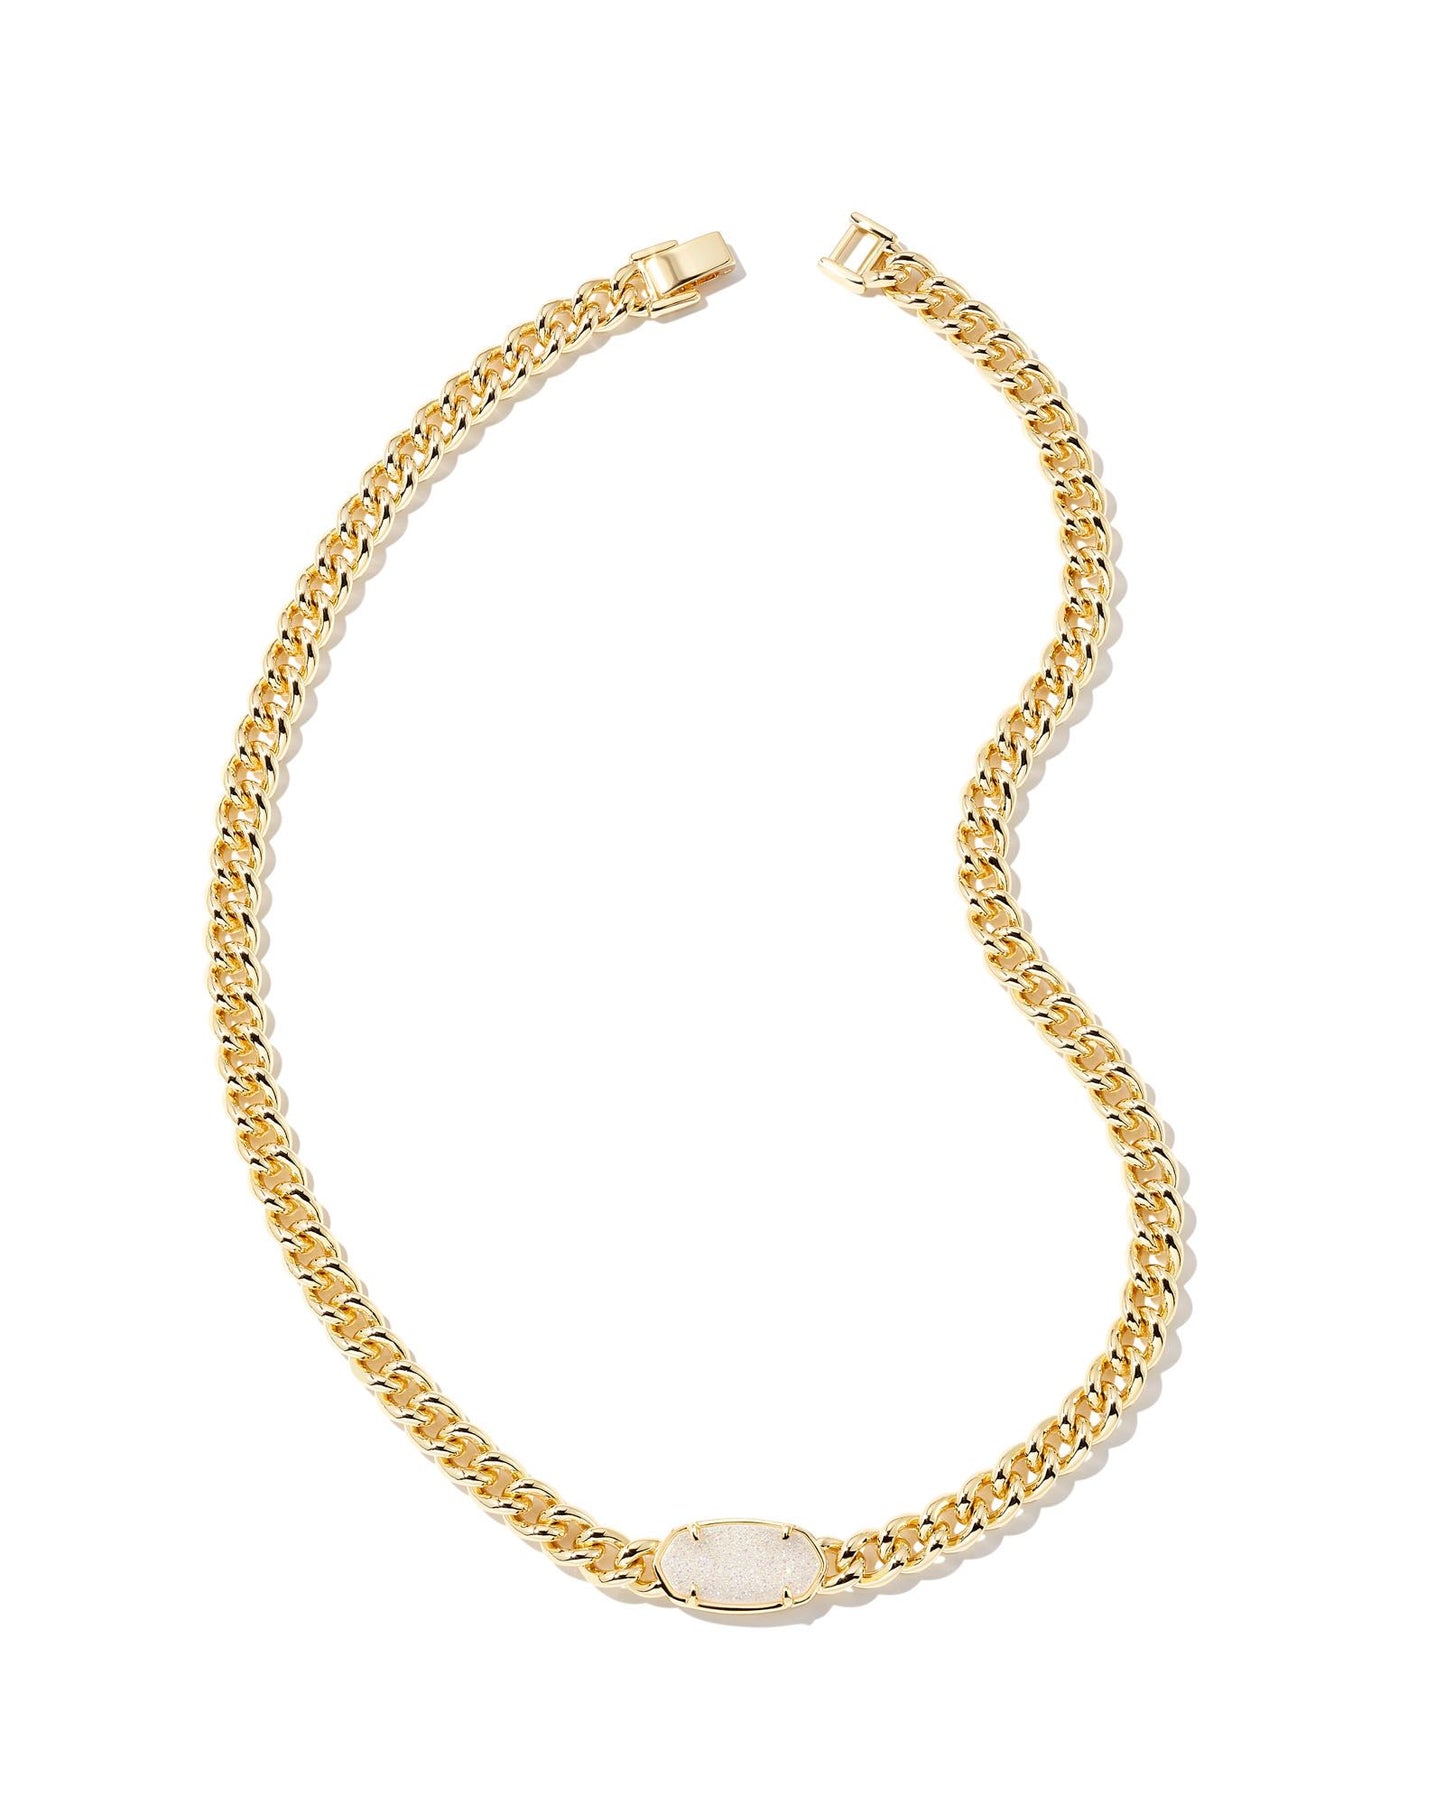 Kendra Scott Elisa Chain Necklace Gold Iridescent Drusy-Necklaces-Kendra Scott-N1842GLD-The Twisted Chandelier